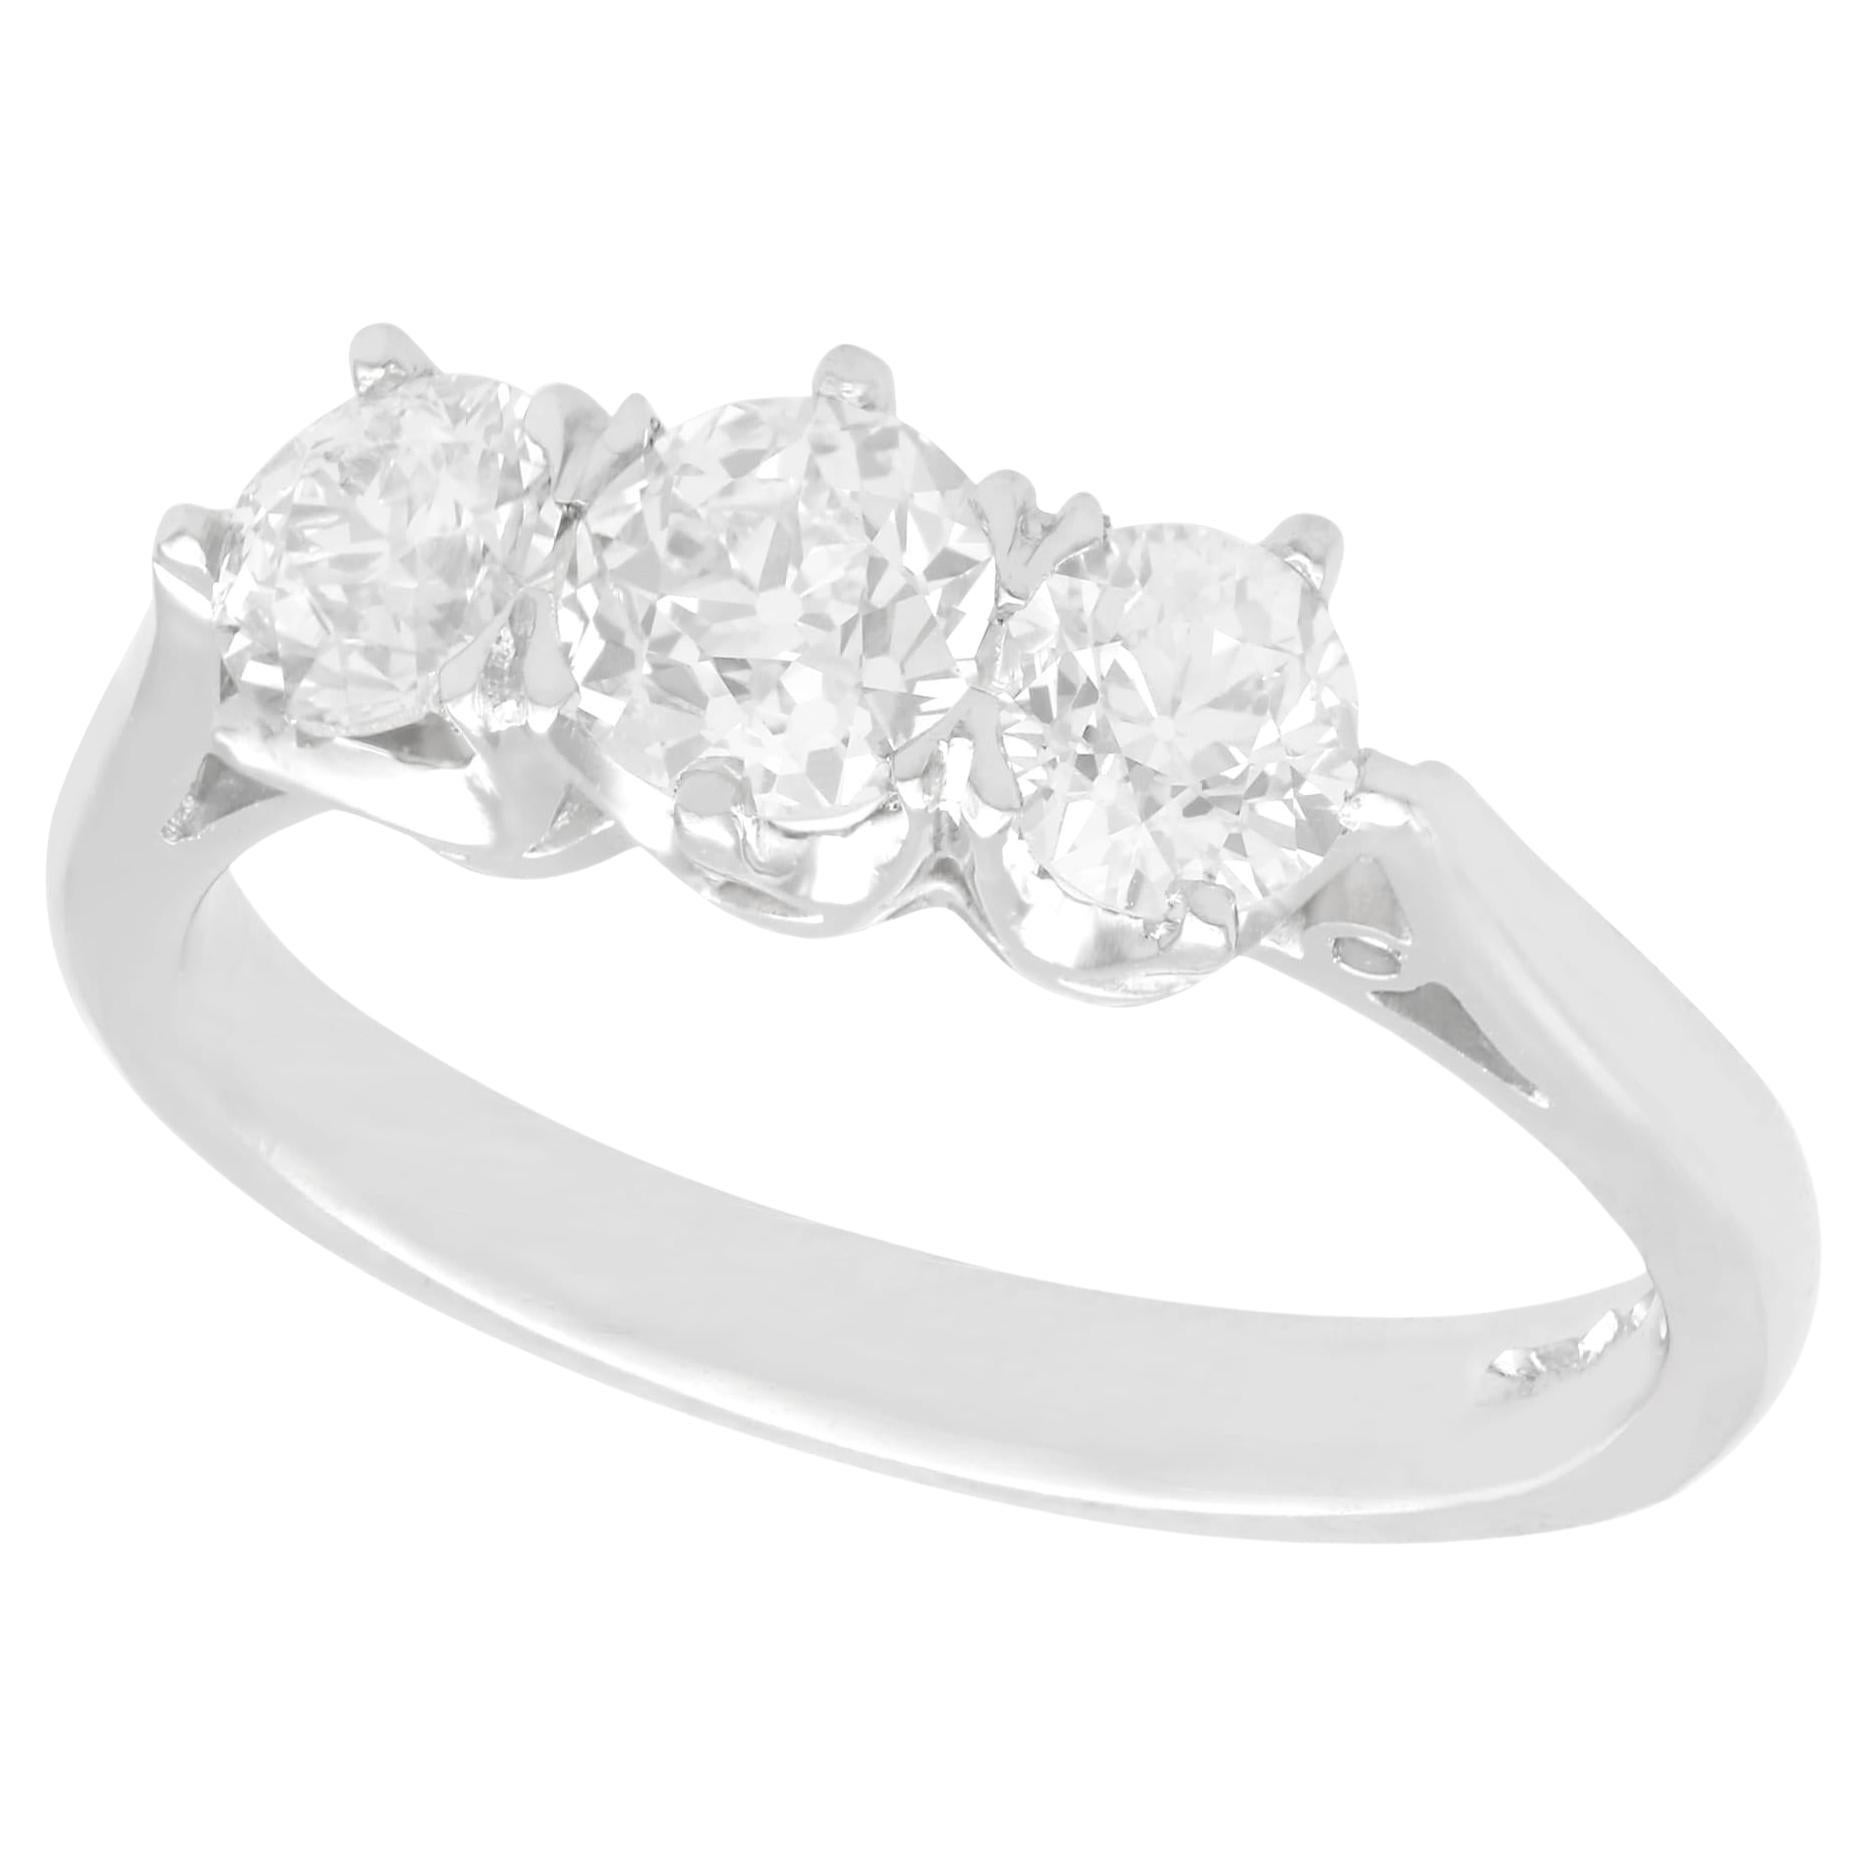 1.45 Carat Diamond and Platinum Trilogy Engagement Ring For Sale